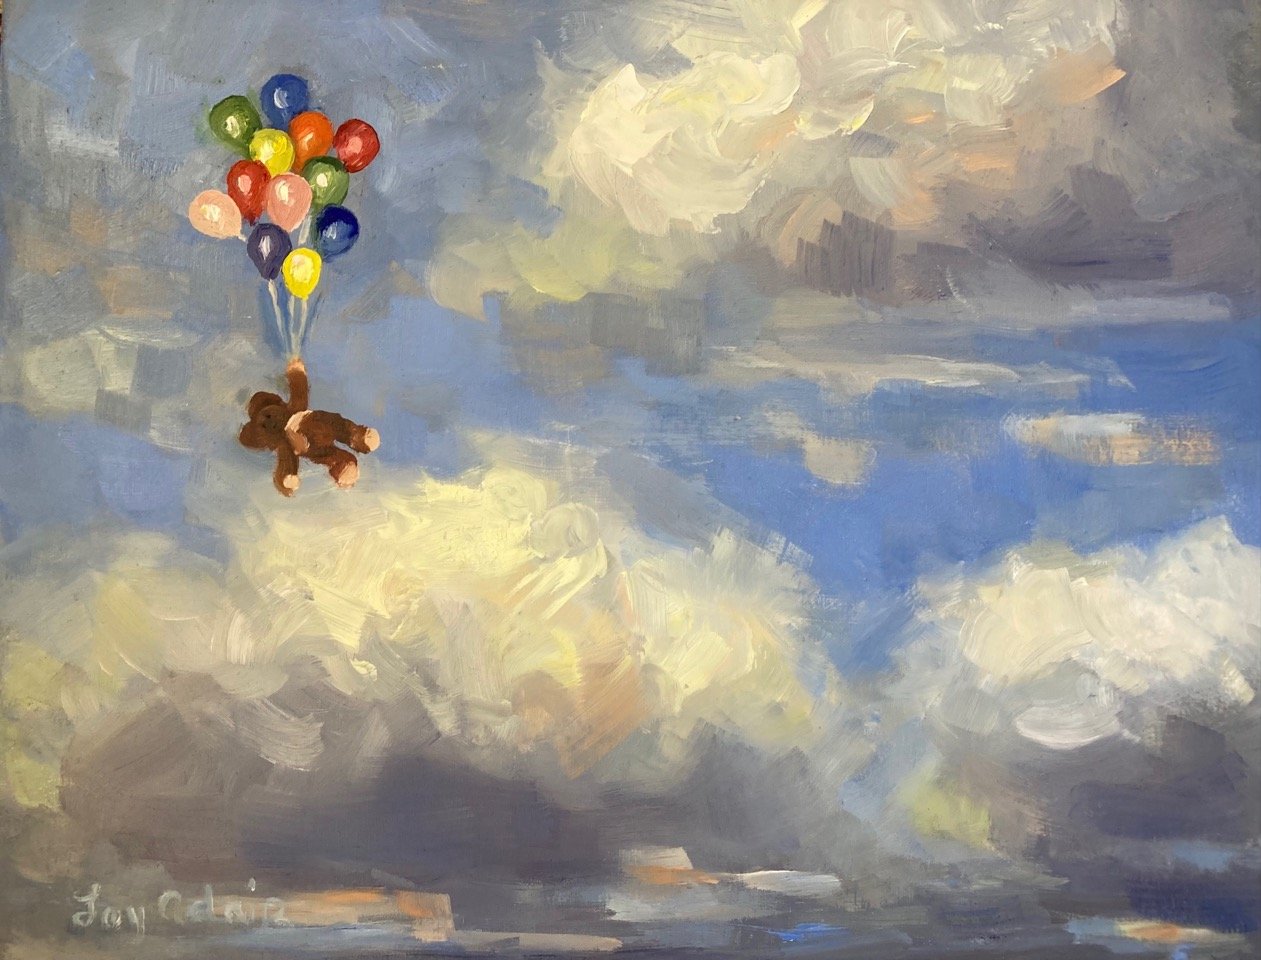 Happiness in the Clouds by Loretta Loy-Adair